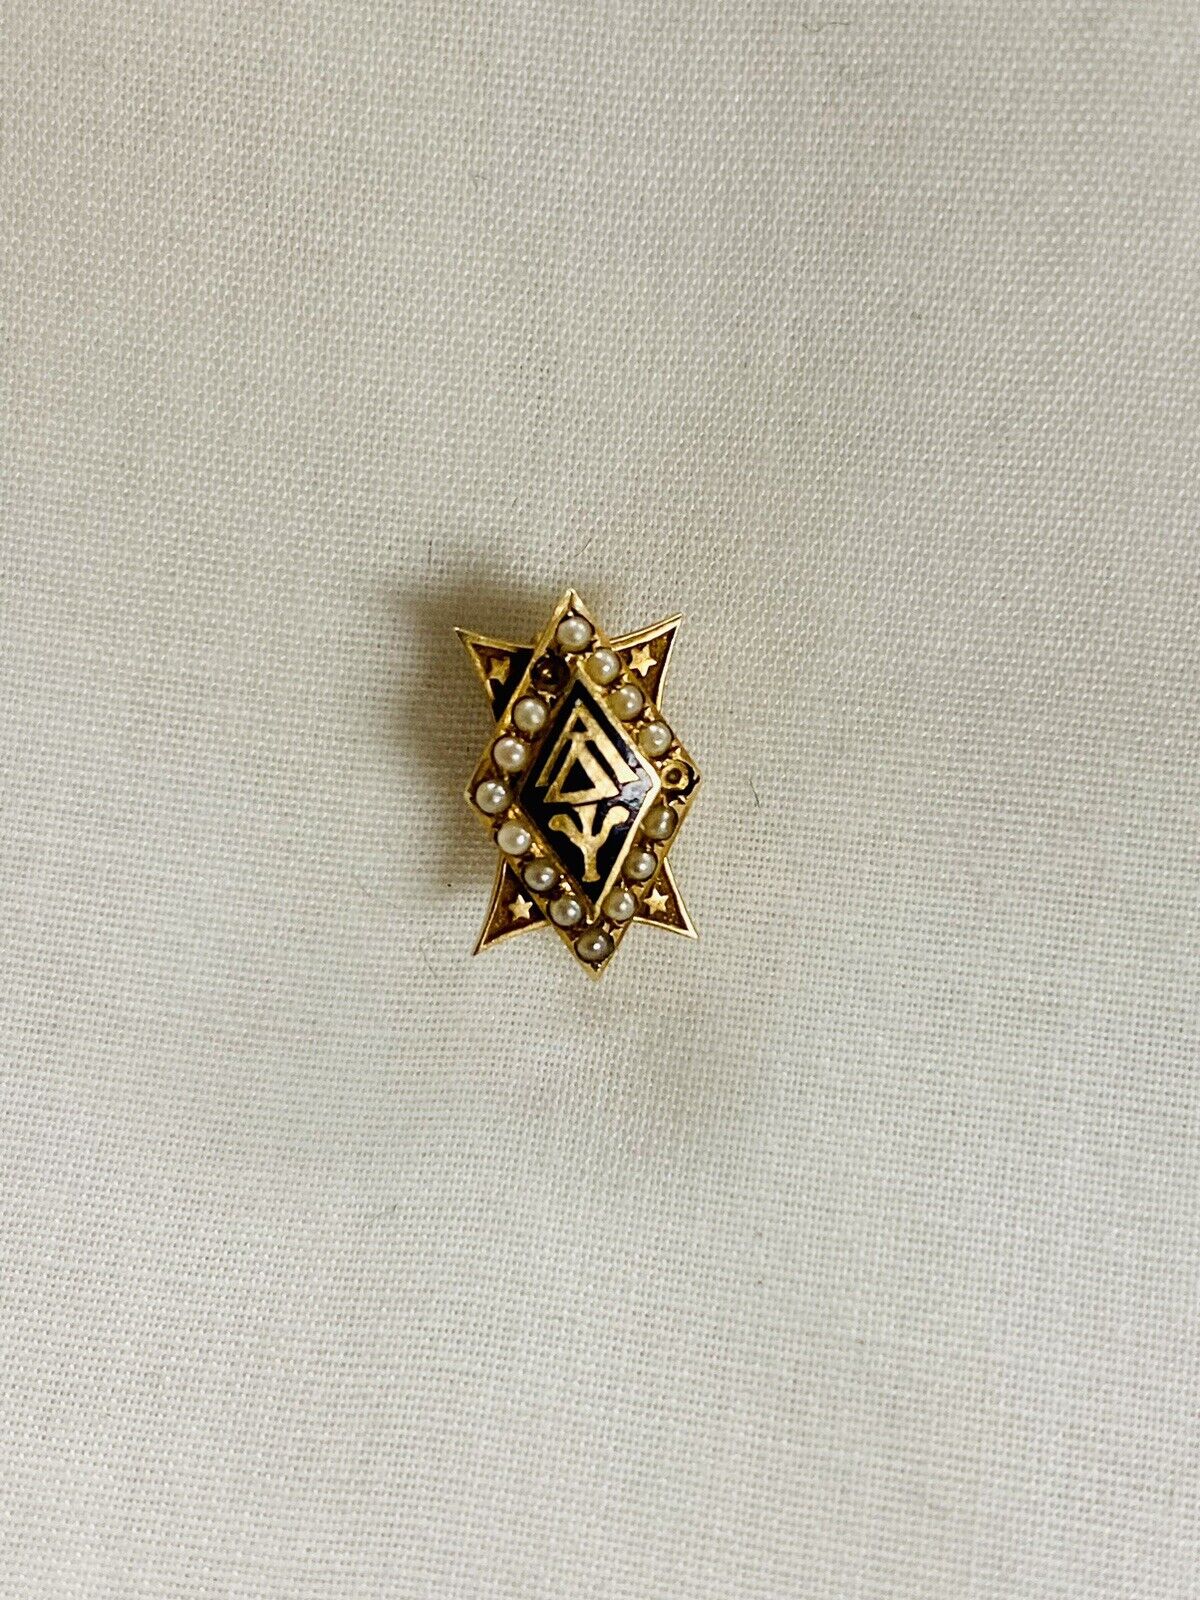 Vintage Delta Psi Gold Sorority Pin- Enamel With Seed Pearls